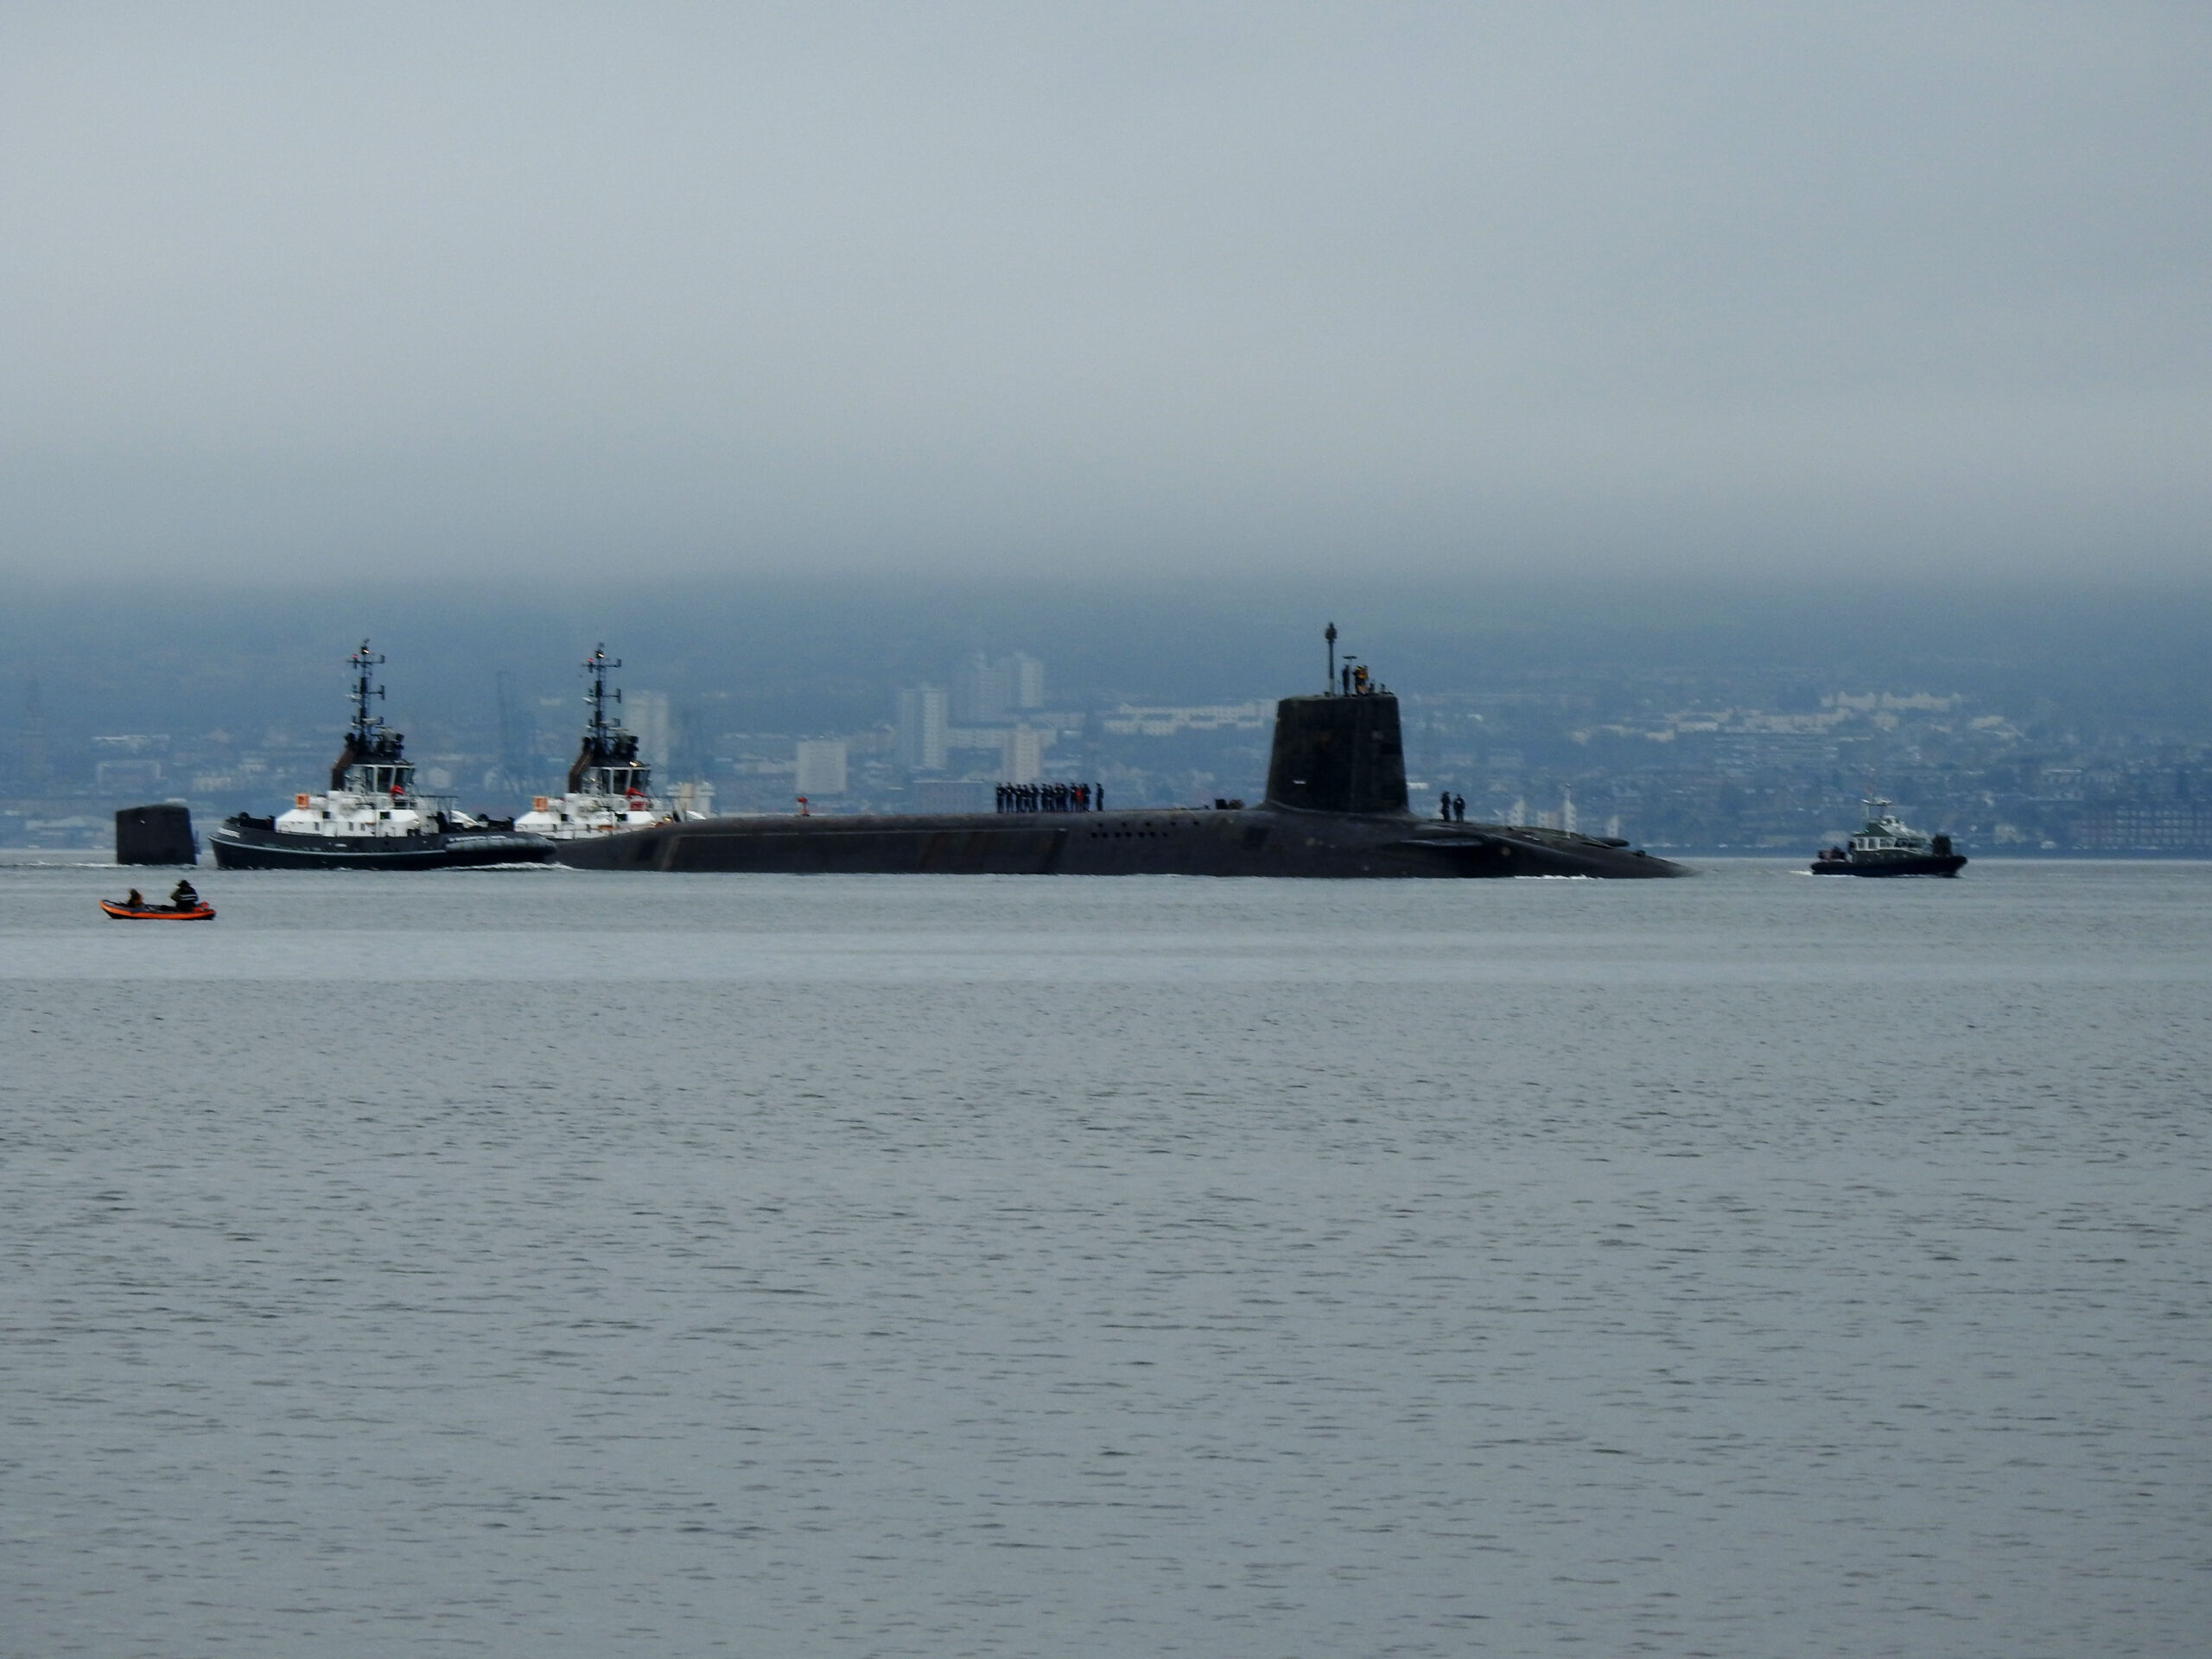 Two tug boats help to push a long dark submarine through the water, under a low grey clouds. Crew members are lined up on the submarine hull